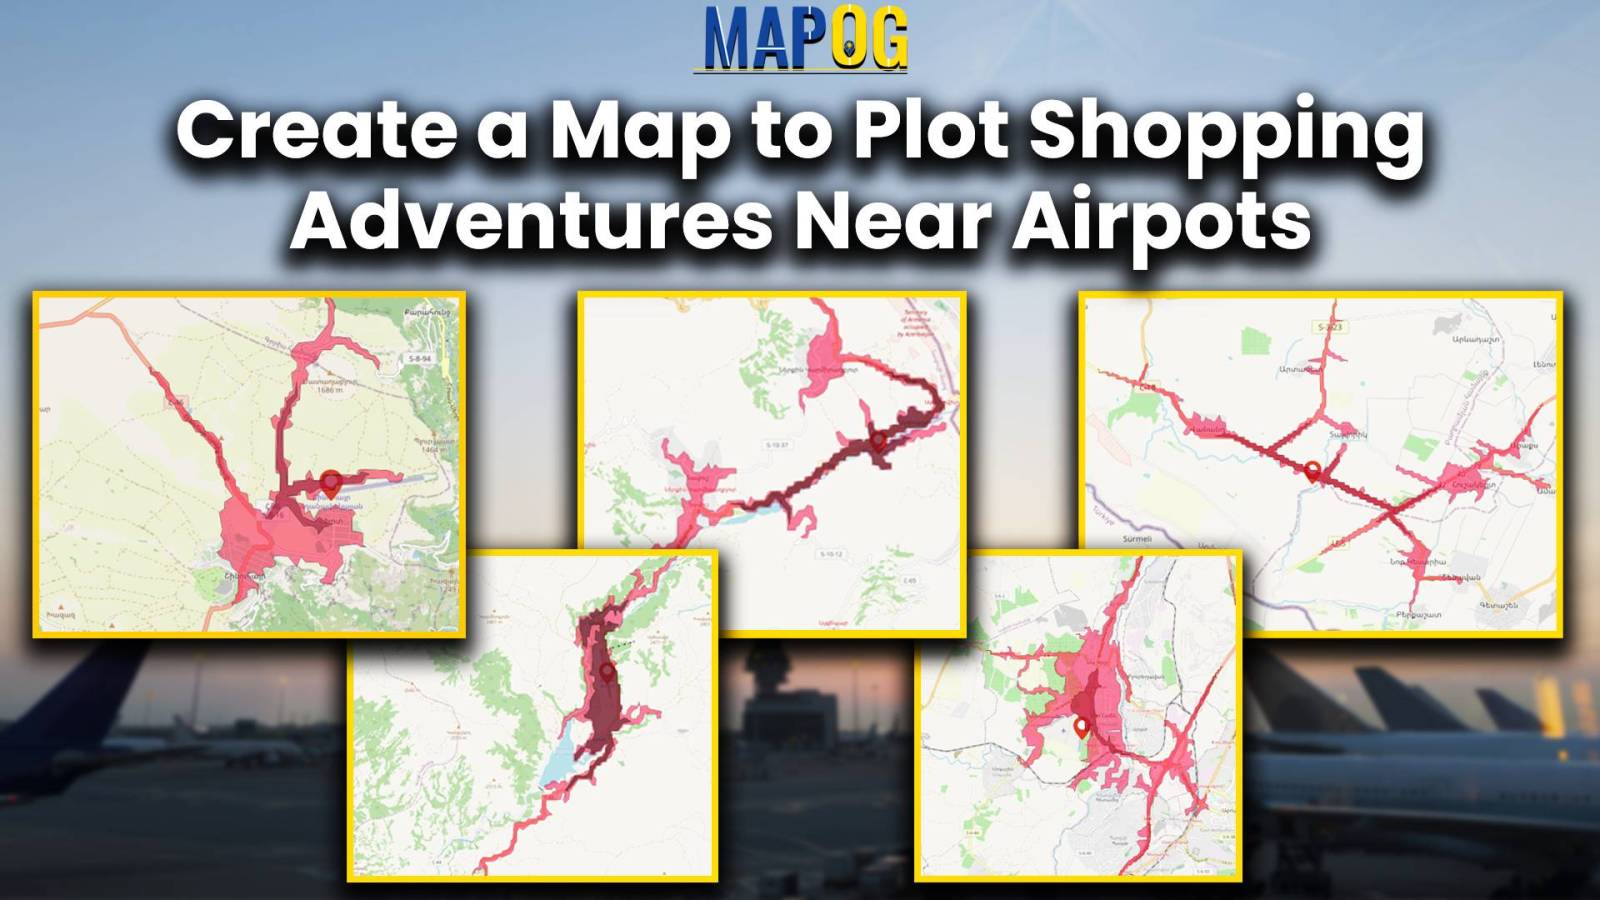 Airport Shopping Isochrone: Find Stores Within Your Time Frame